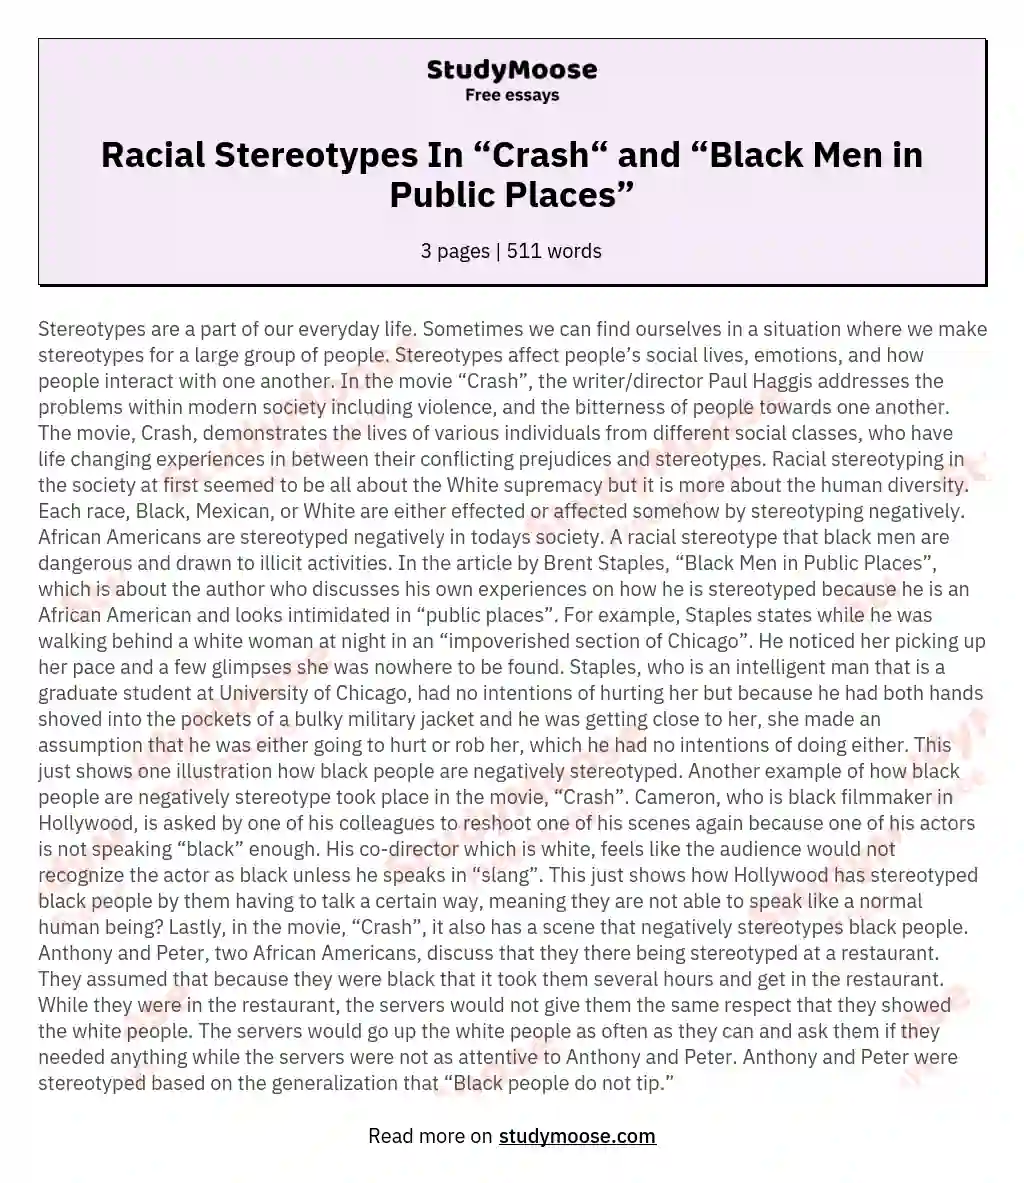 Racial Stereotypes In “Crash“ and “Black Men in Public Places” essay